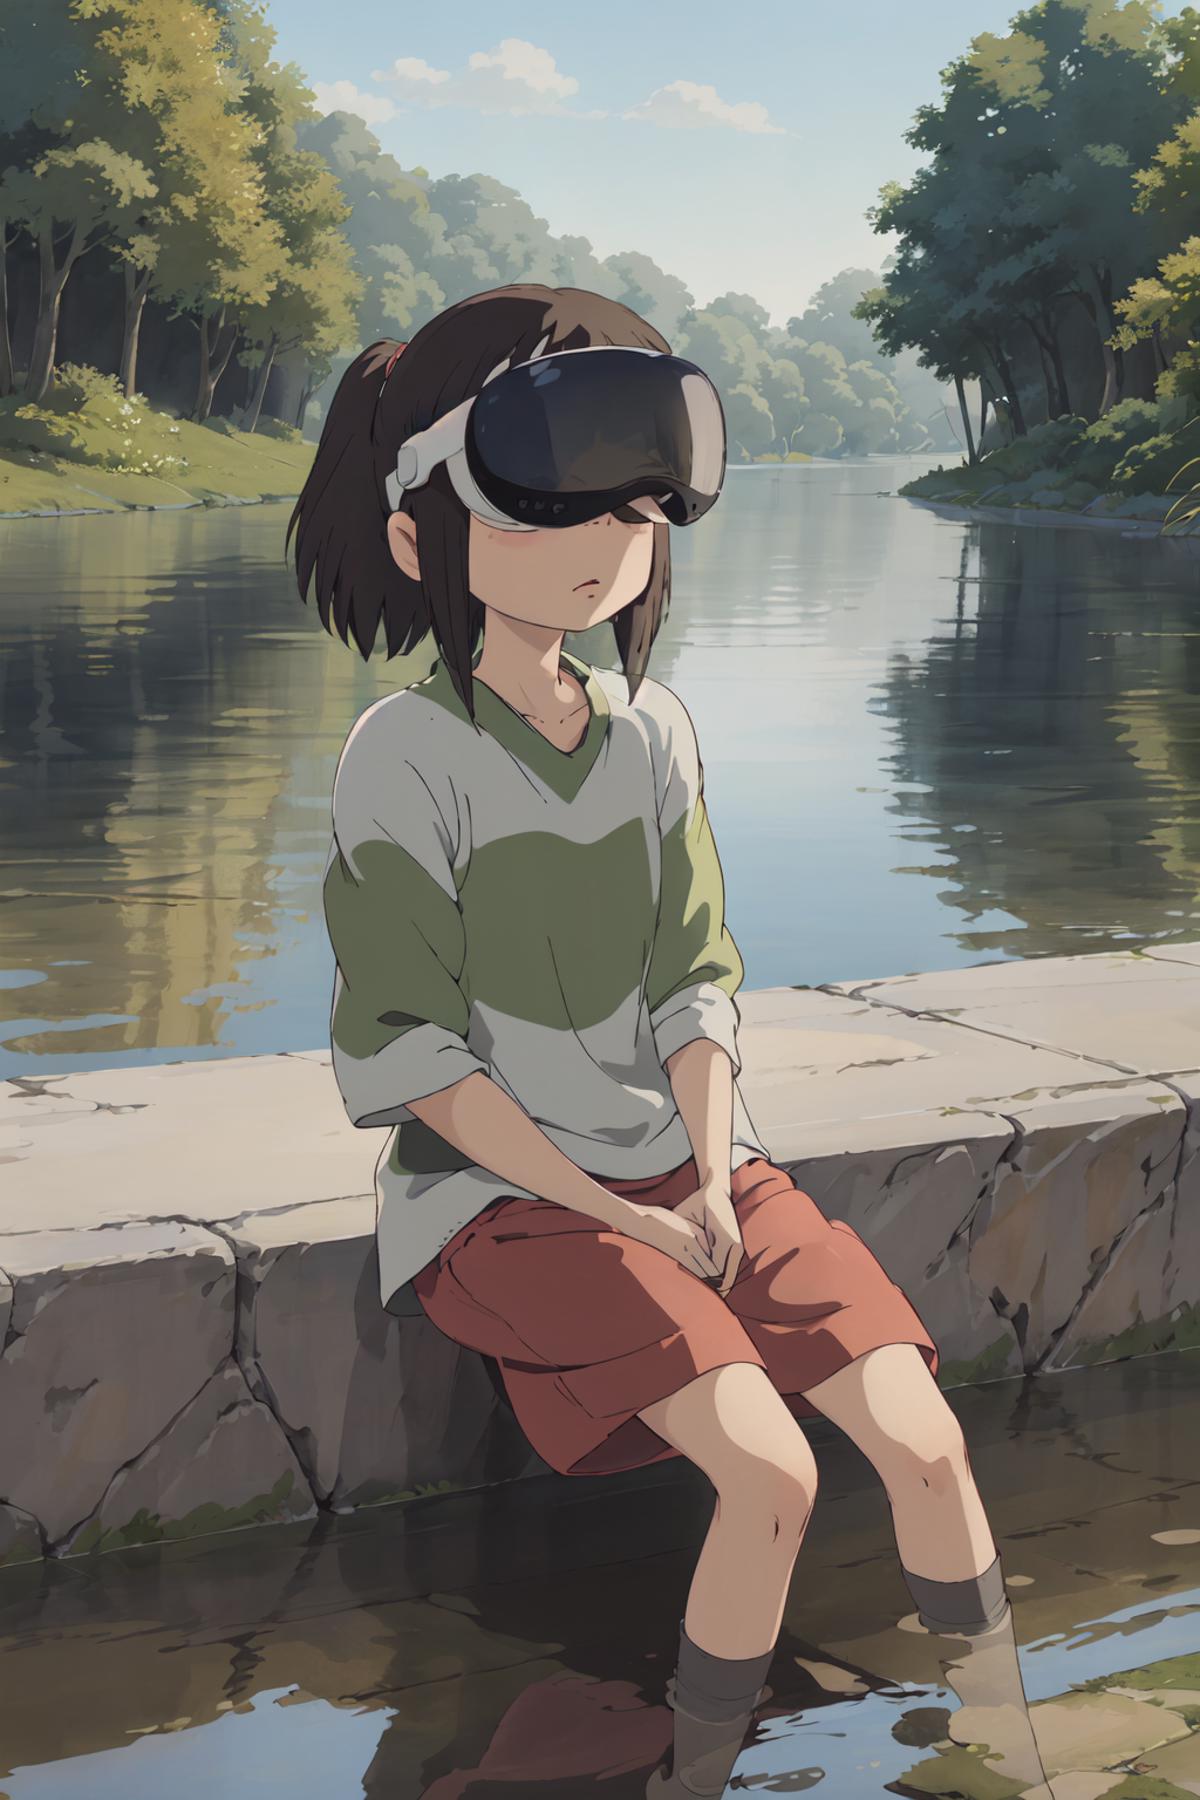 A girl wearing a green and white striped shirt and red shorts sitting by the water with her eyes closed.